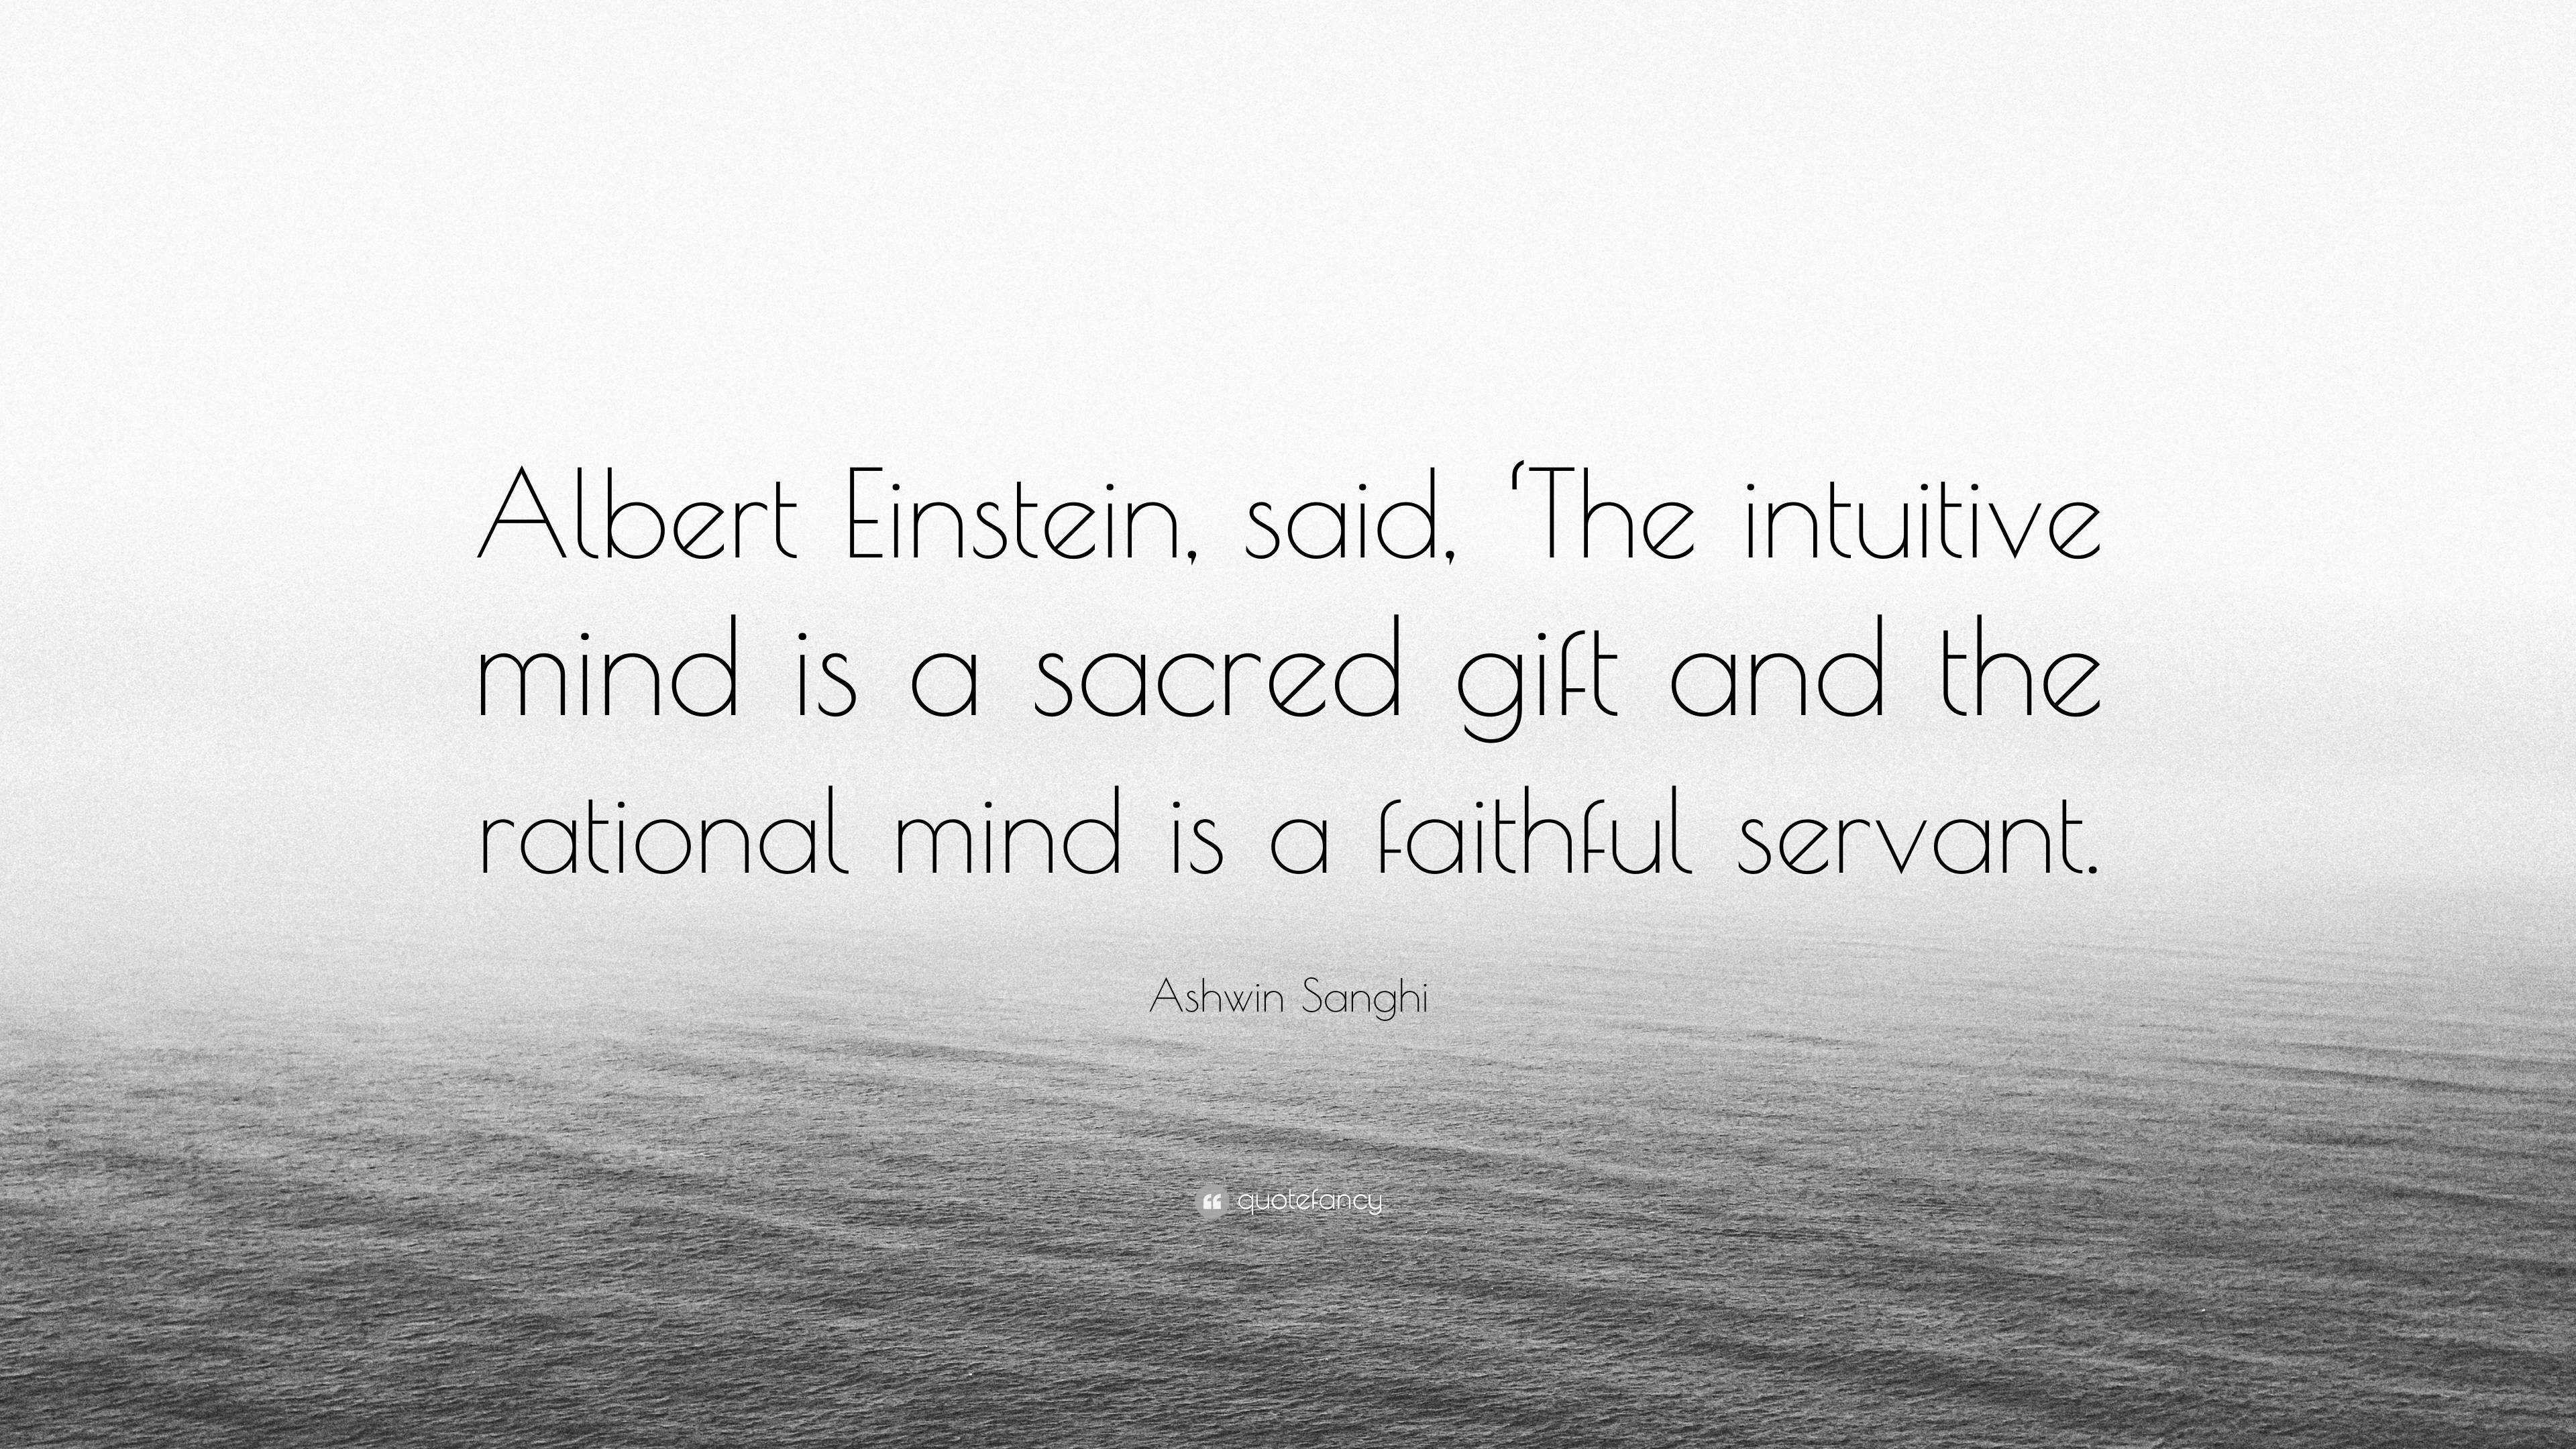 Ashwin Sanghi Quote “Albert Einstein, said, ‘The intuitive mind is a